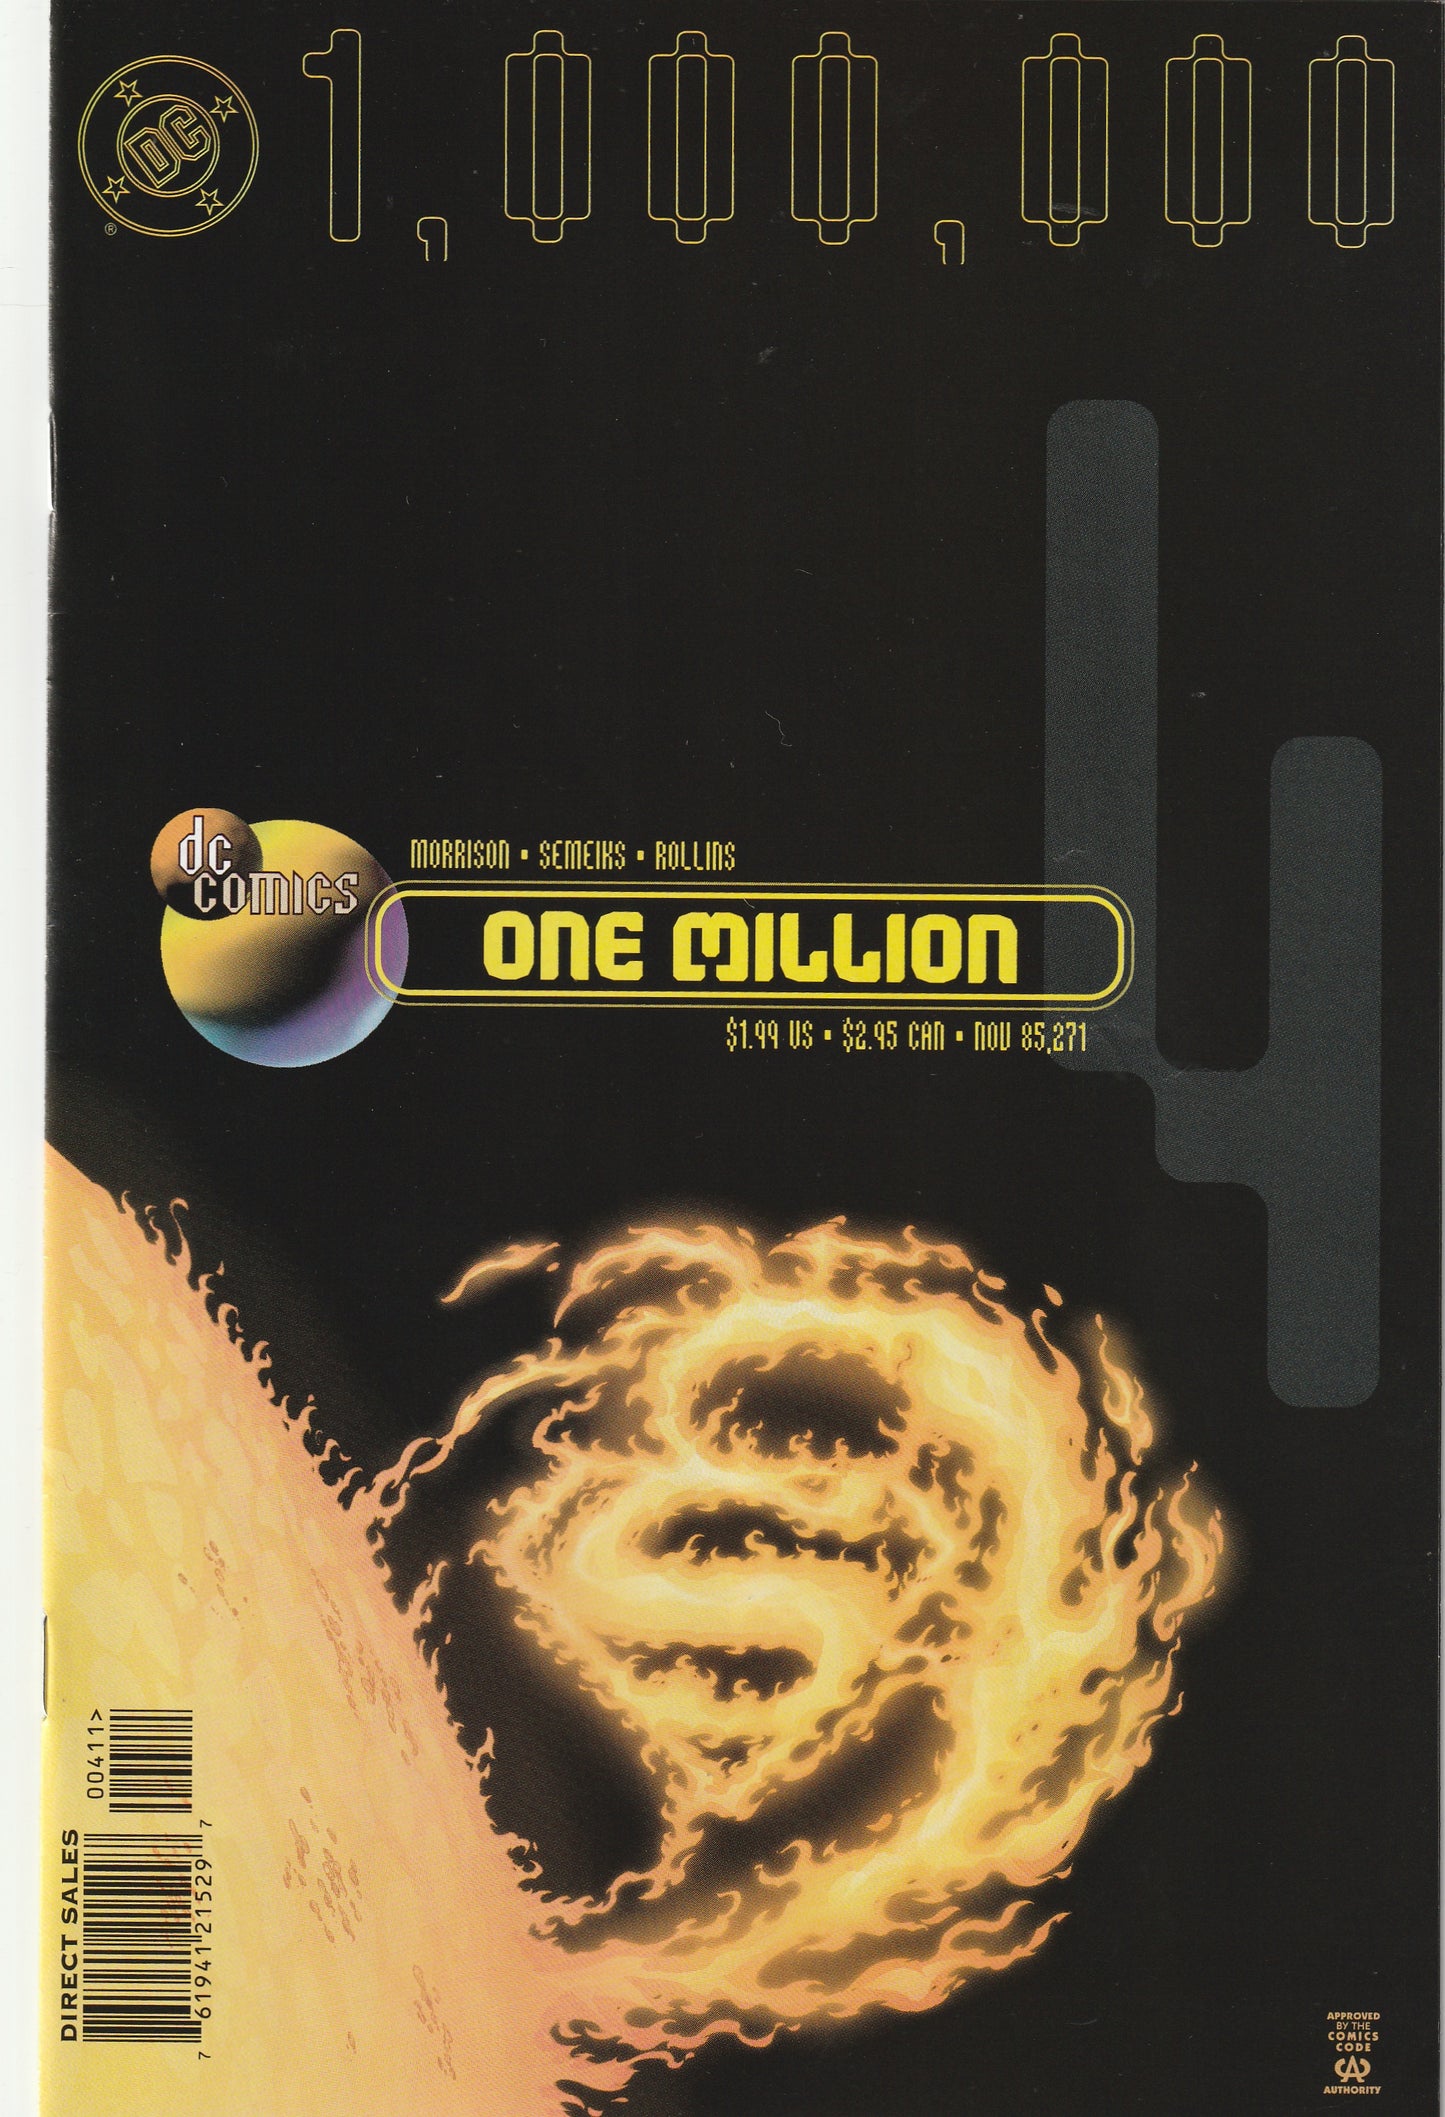 DC One Million (1998) - Complete 4 issue mini-series